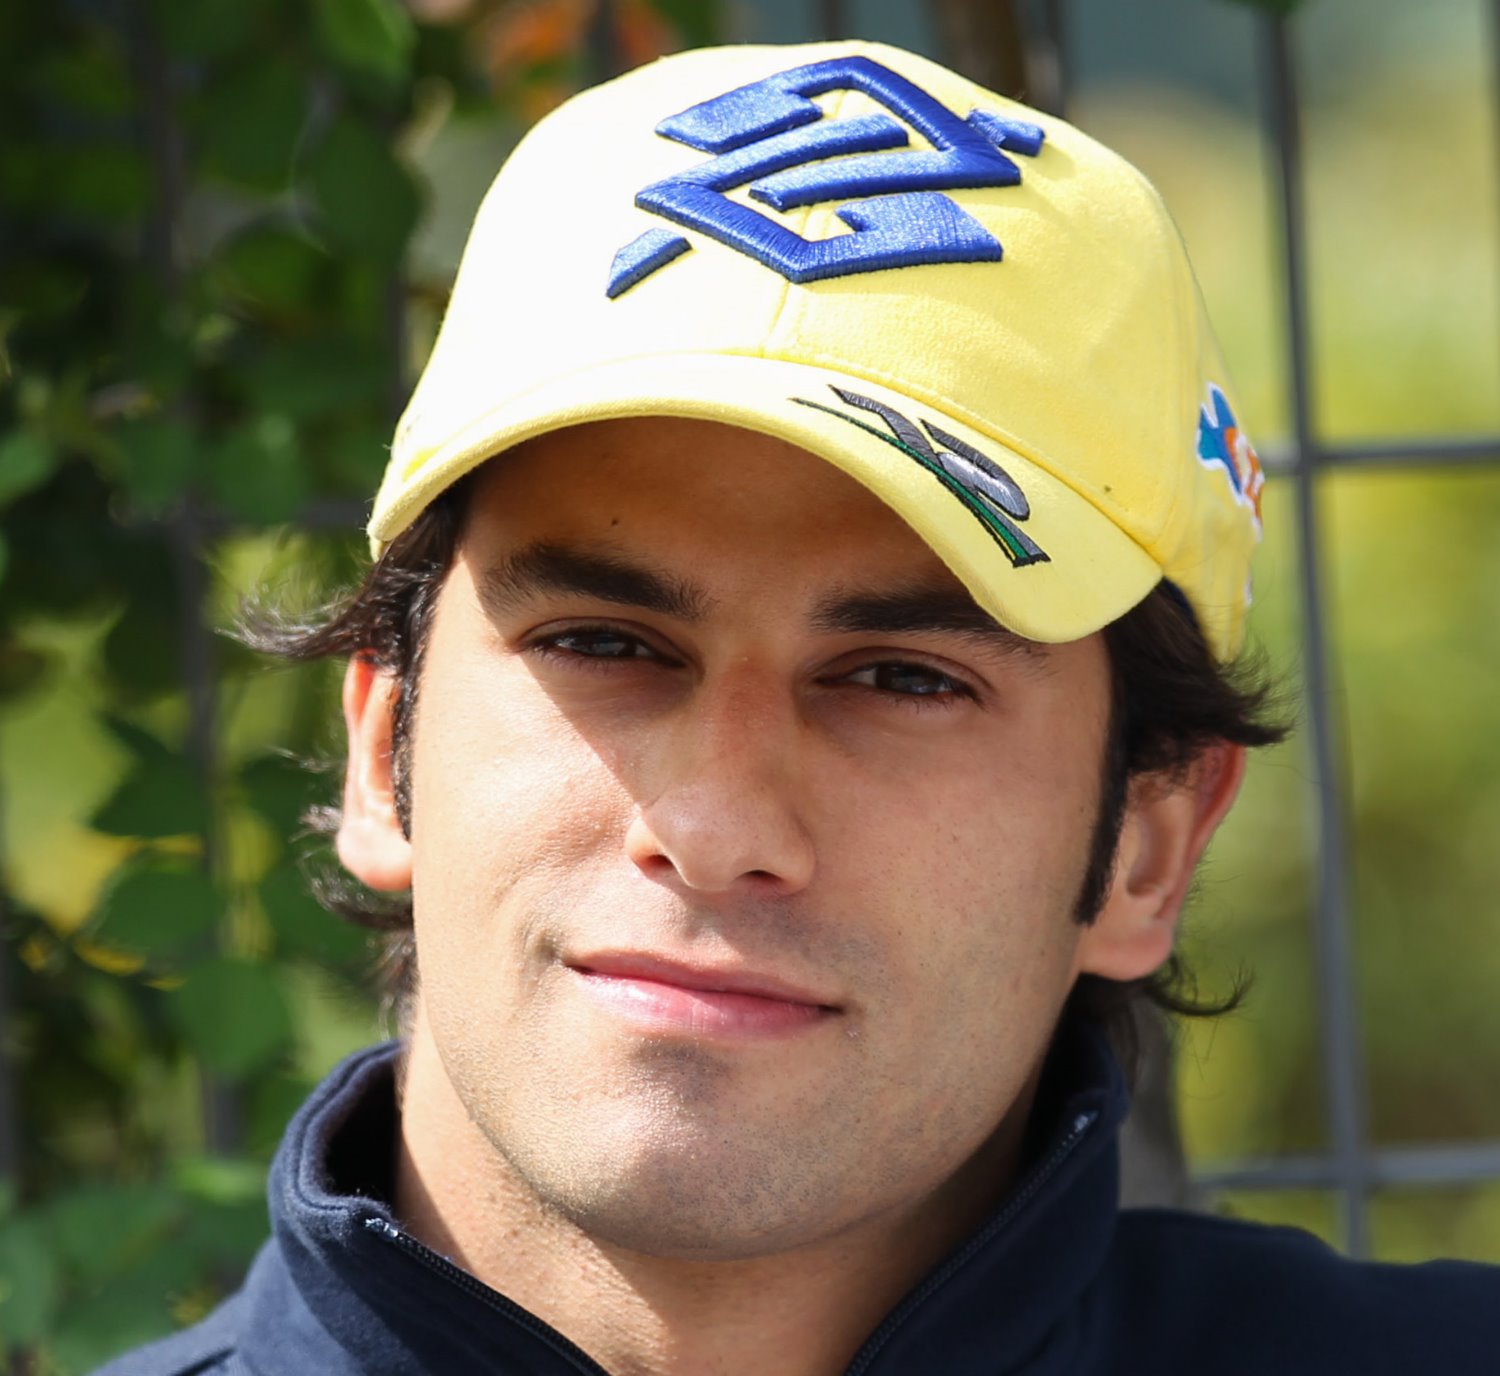 Felipe Nasr cannot afford to buy an F1 seat